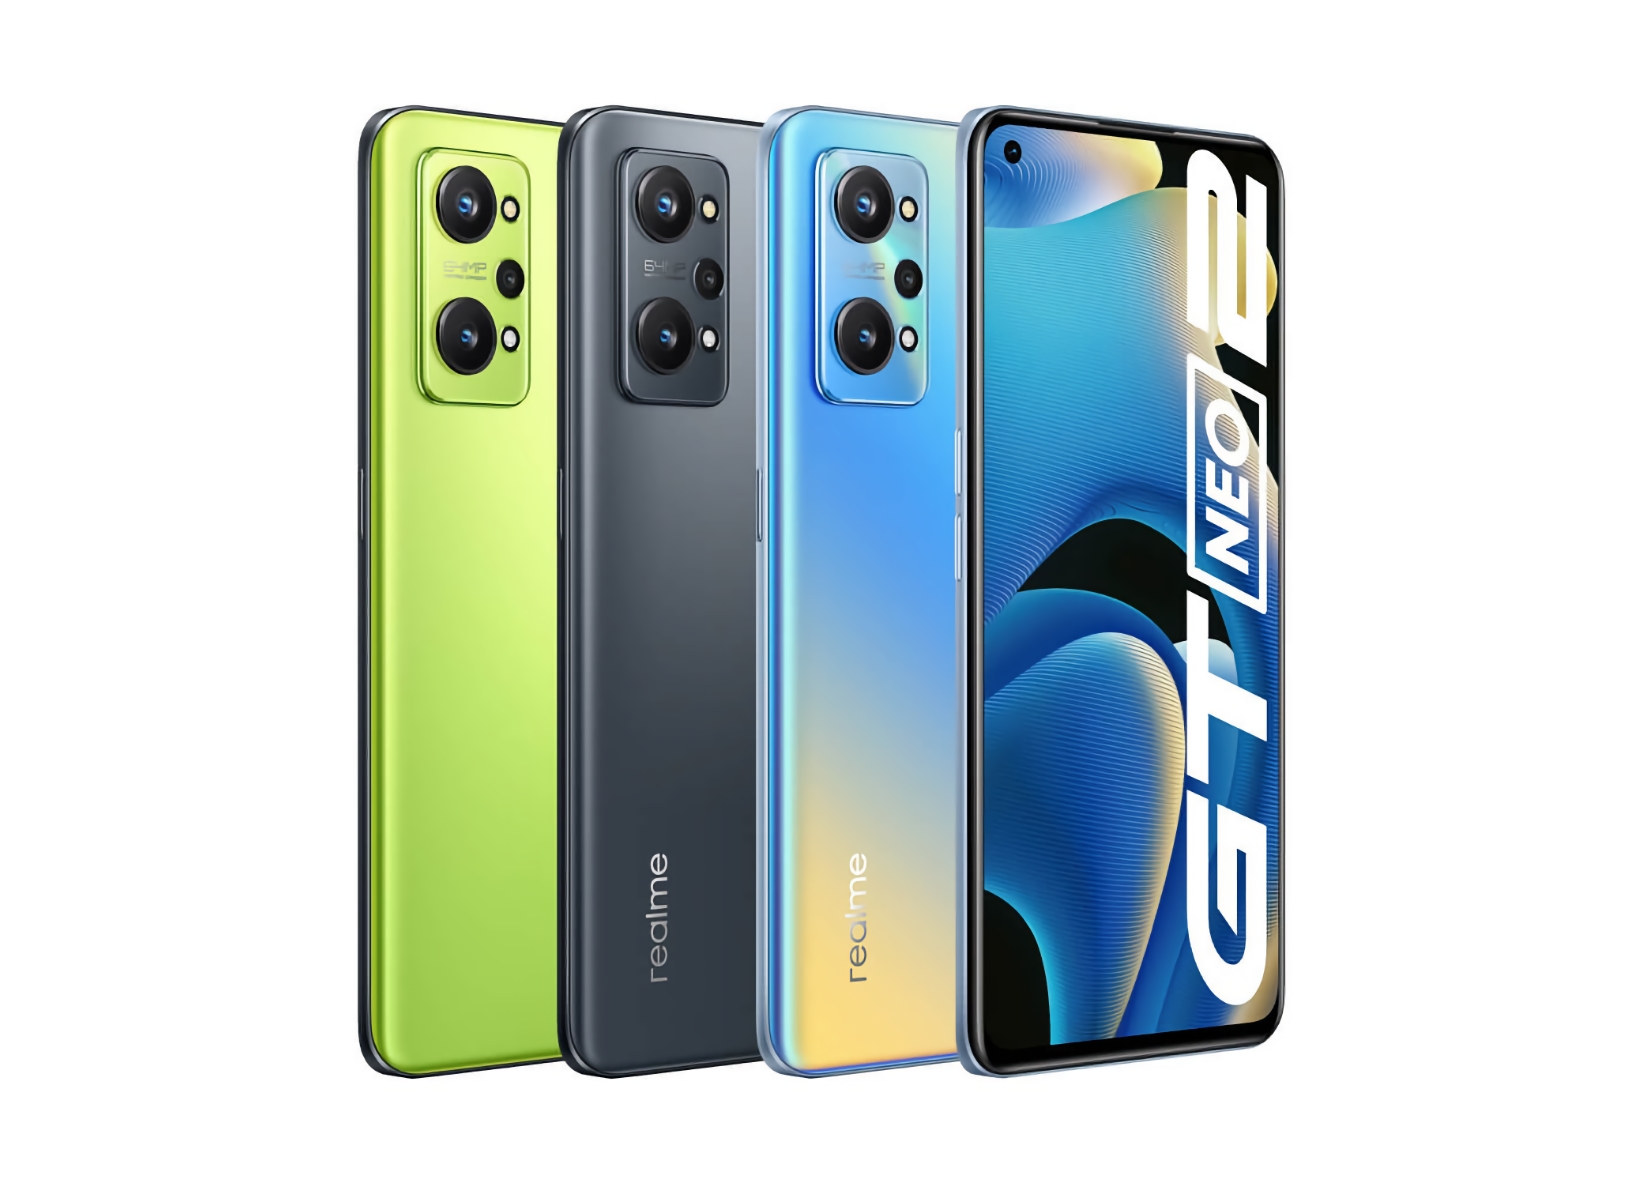 Realme GT Neo 2 arrived in Europe: Snapdragon 870 chip, triple 64 MP camera, 65W fast charging and a price tag from €369